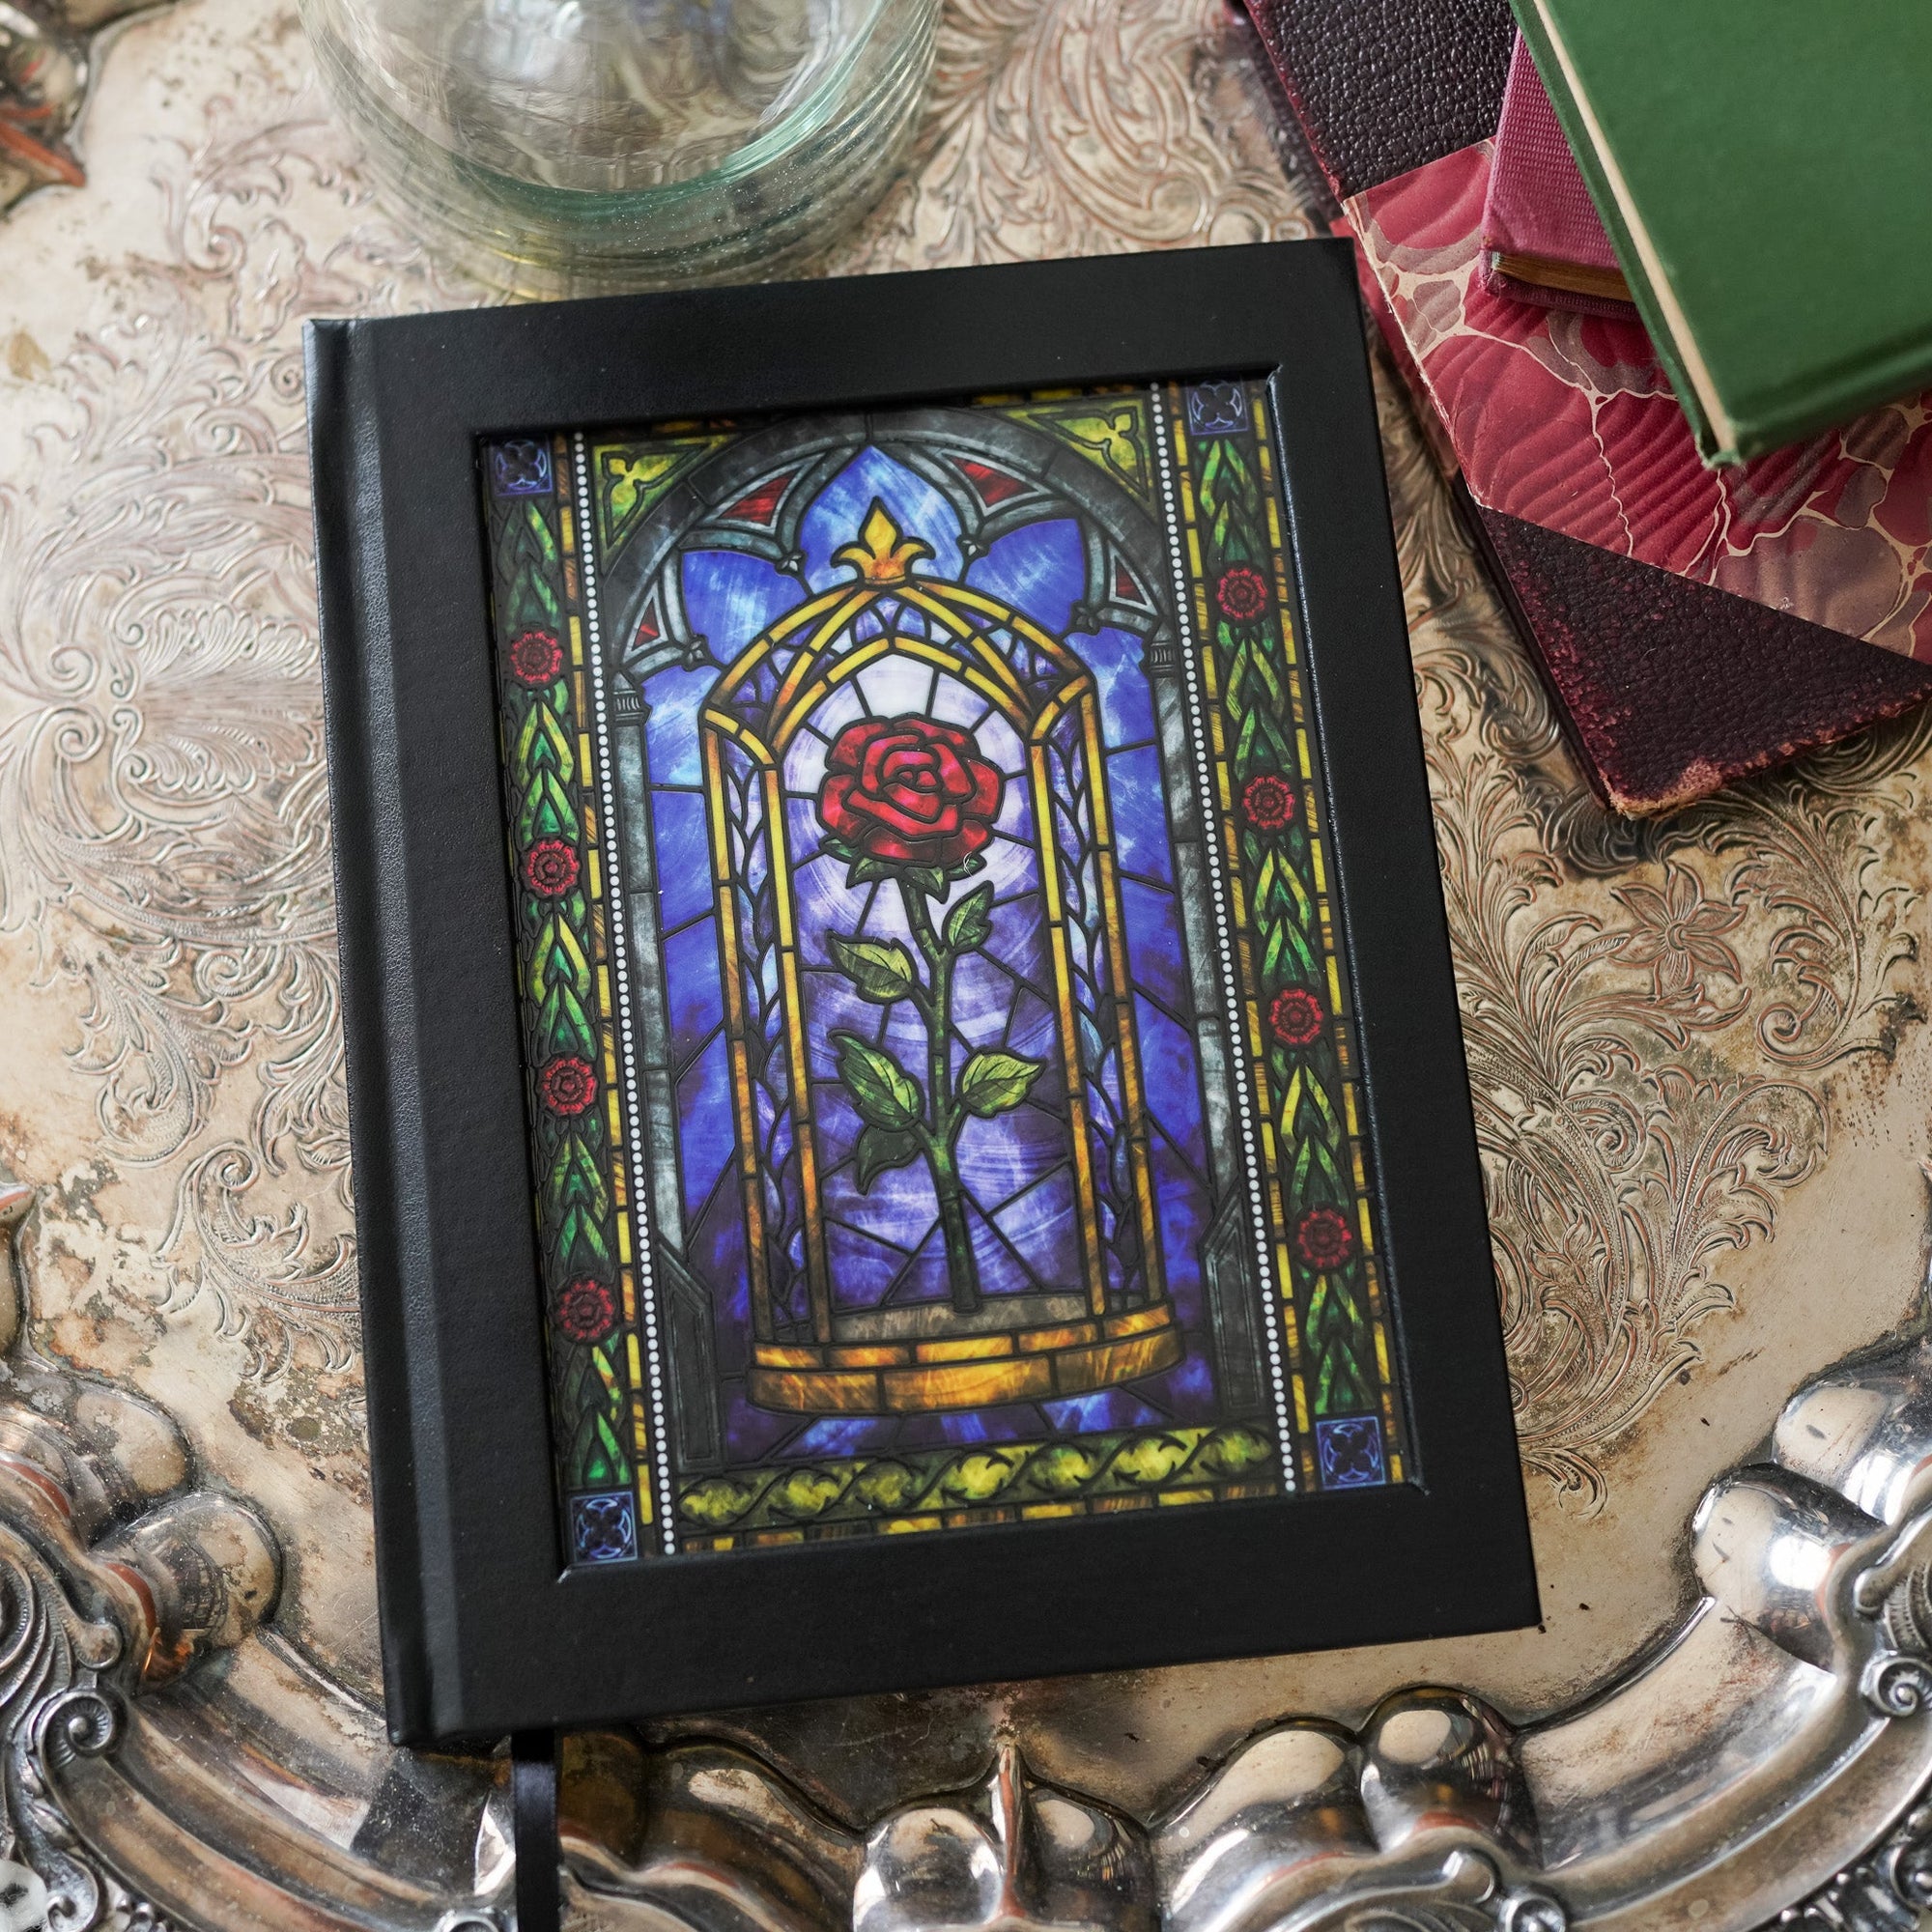 Beauty and the Beast Fairytale Notebook with a rose in stained-glass art on the cover